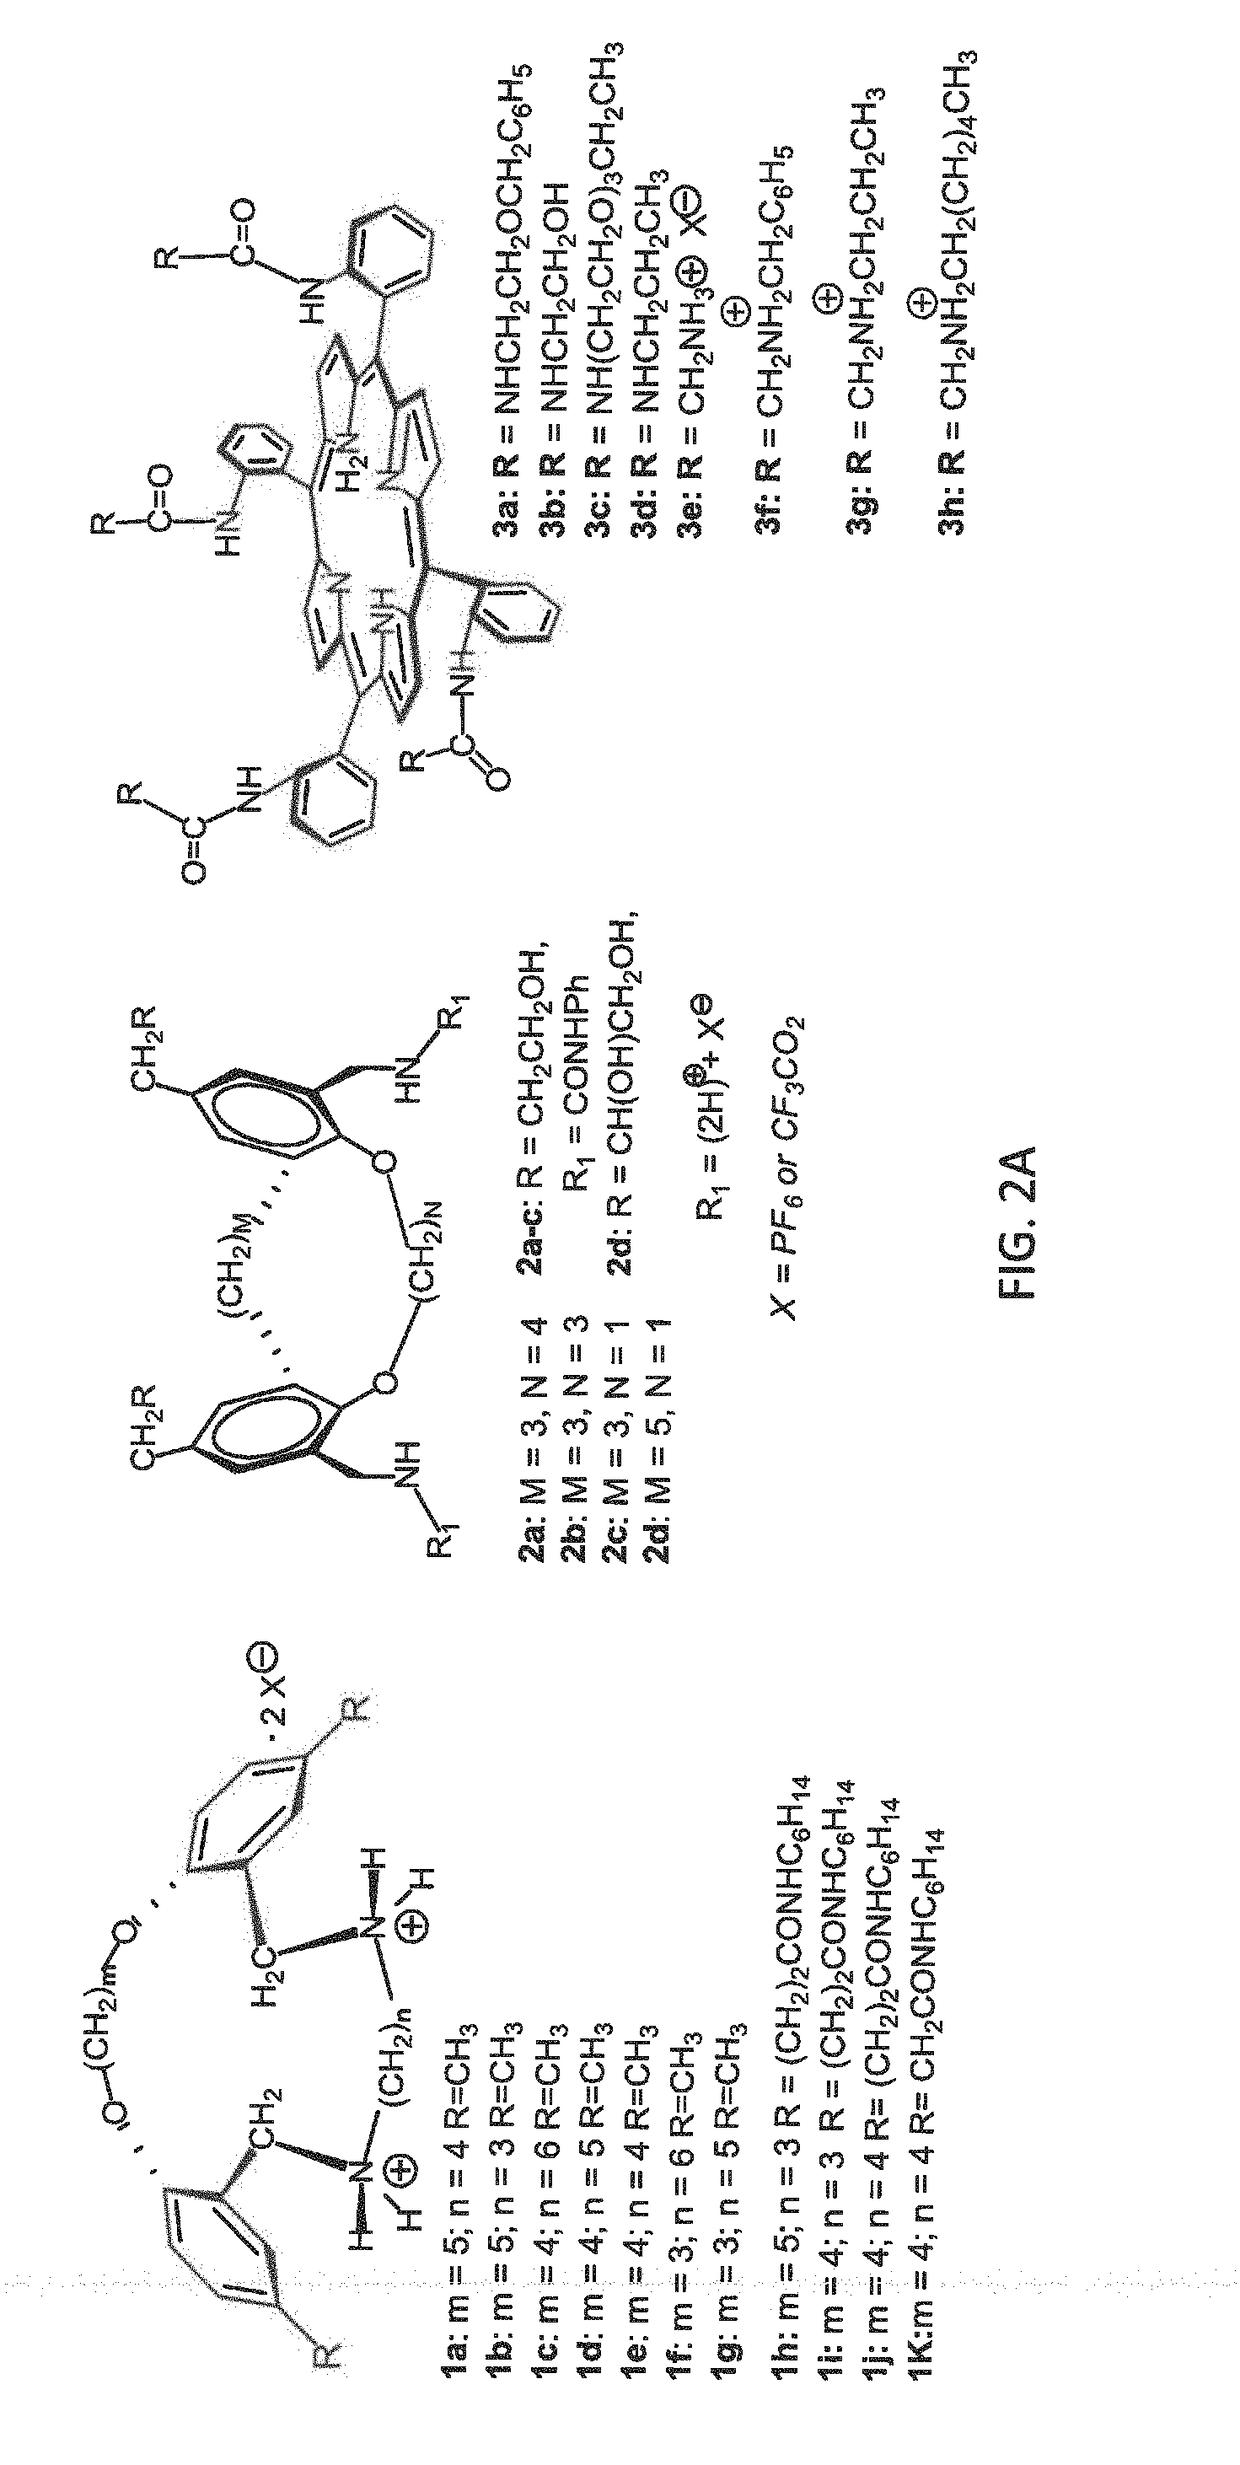 Compounds for inhibiting bacterial growth via phosphatidylglycerol binding